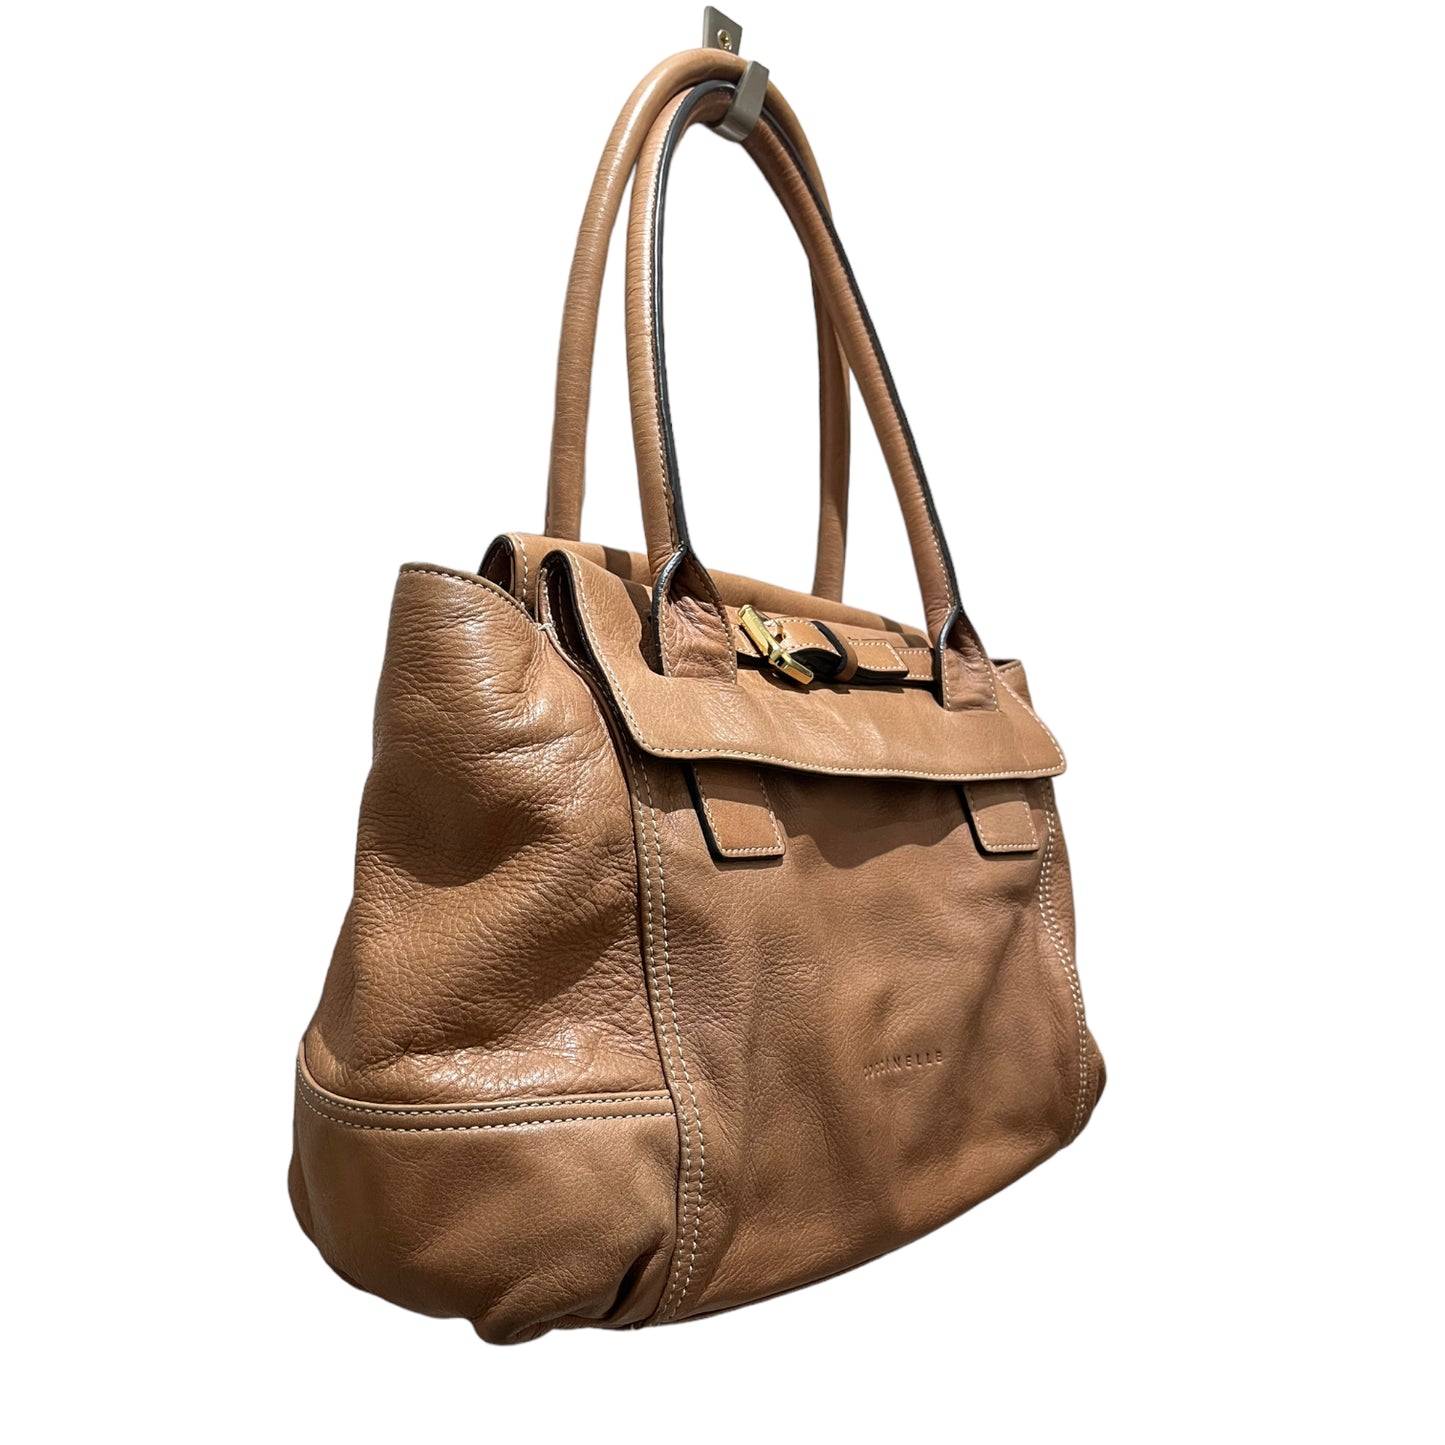 Coccinelle Tan Leather Bag